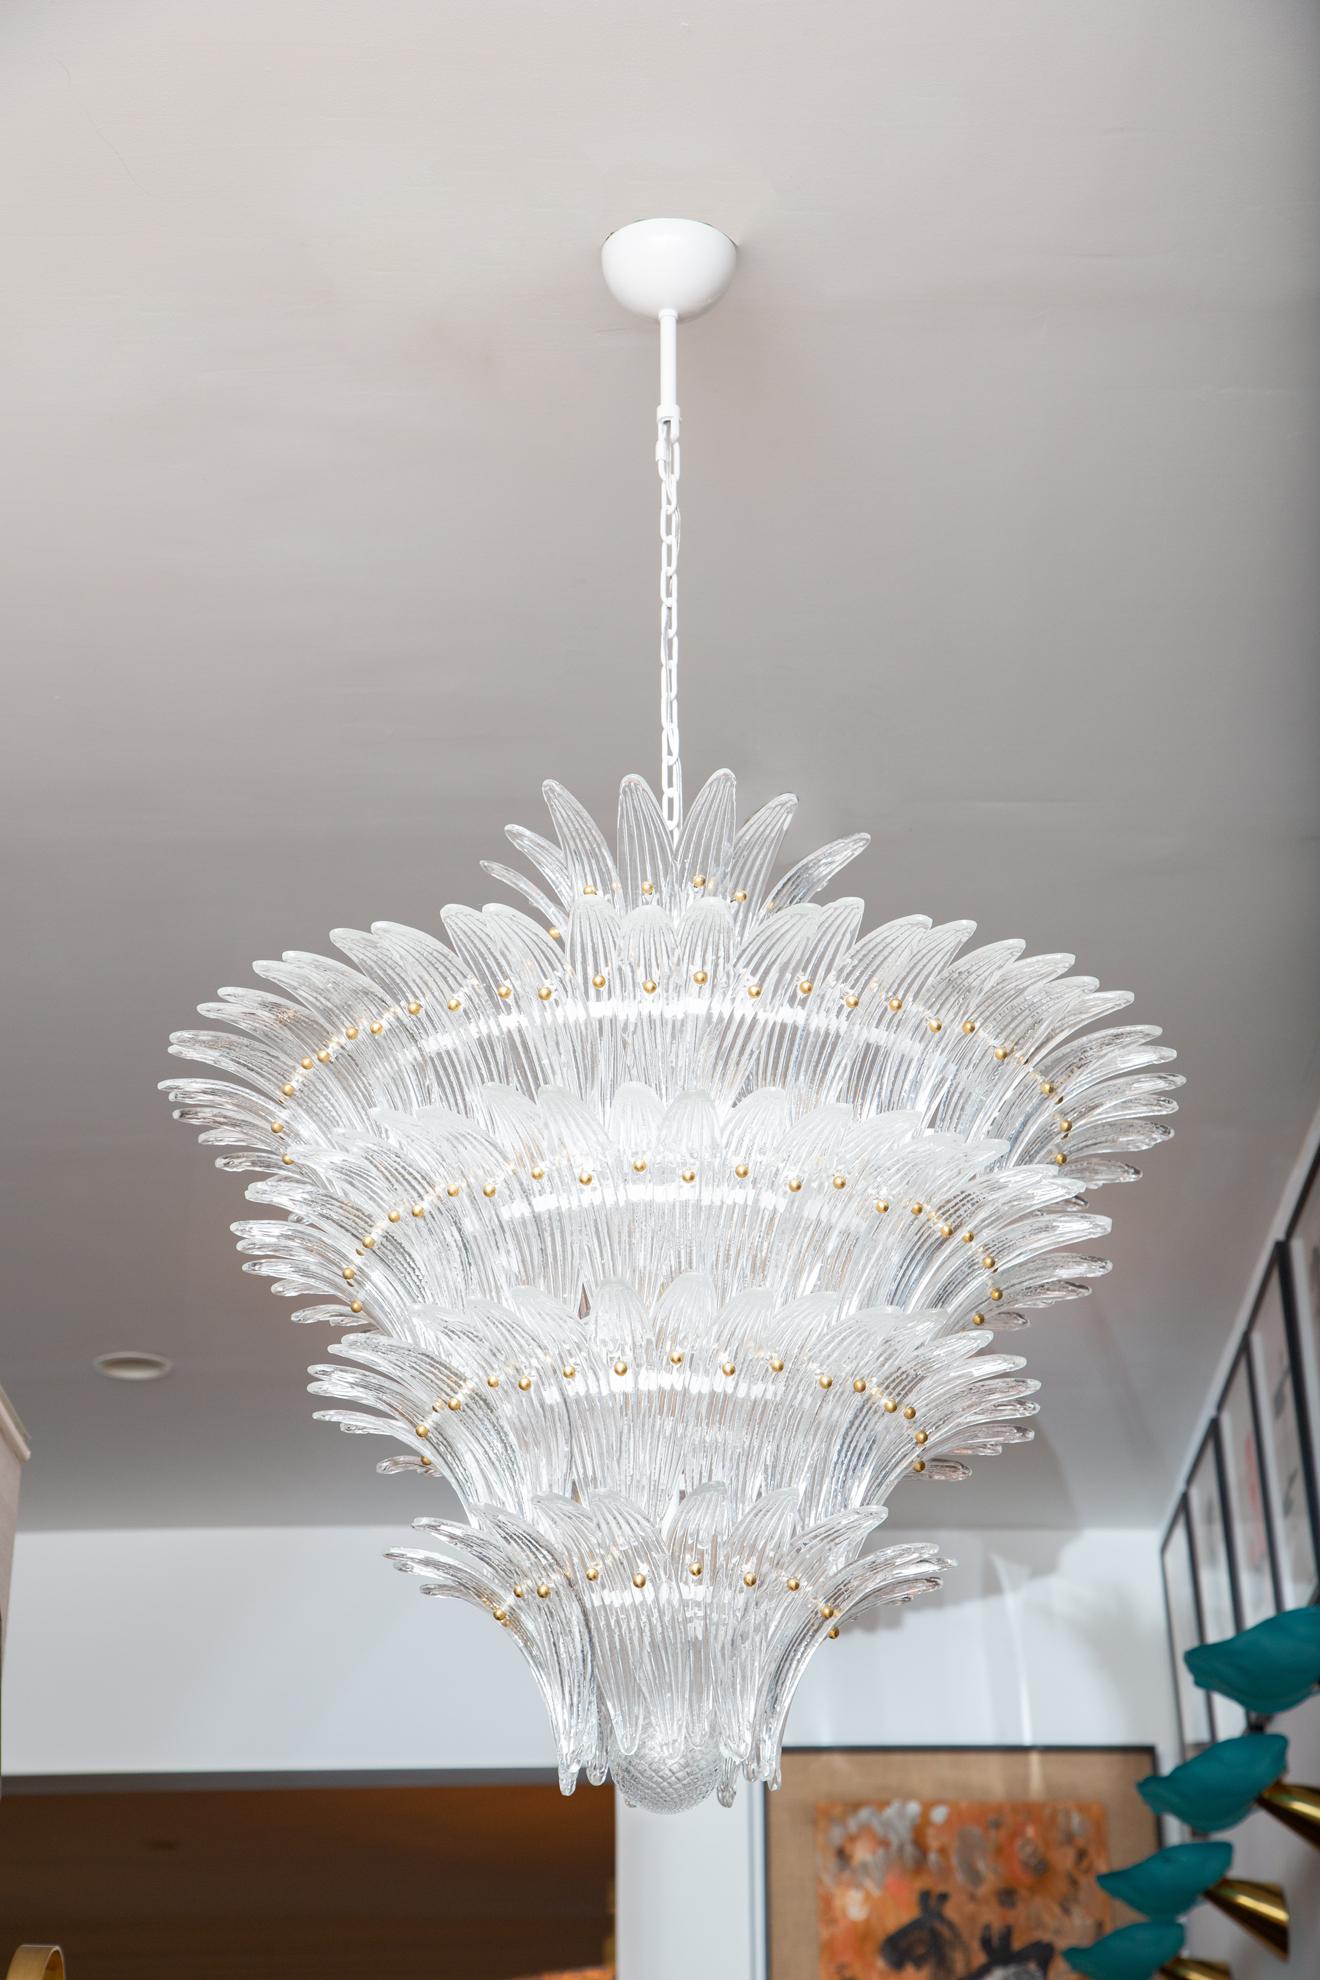 Italian palmette chandelier Murano glass leaves, in stock
Gracious Murano clear textured glass chandelier.
Five tiers 